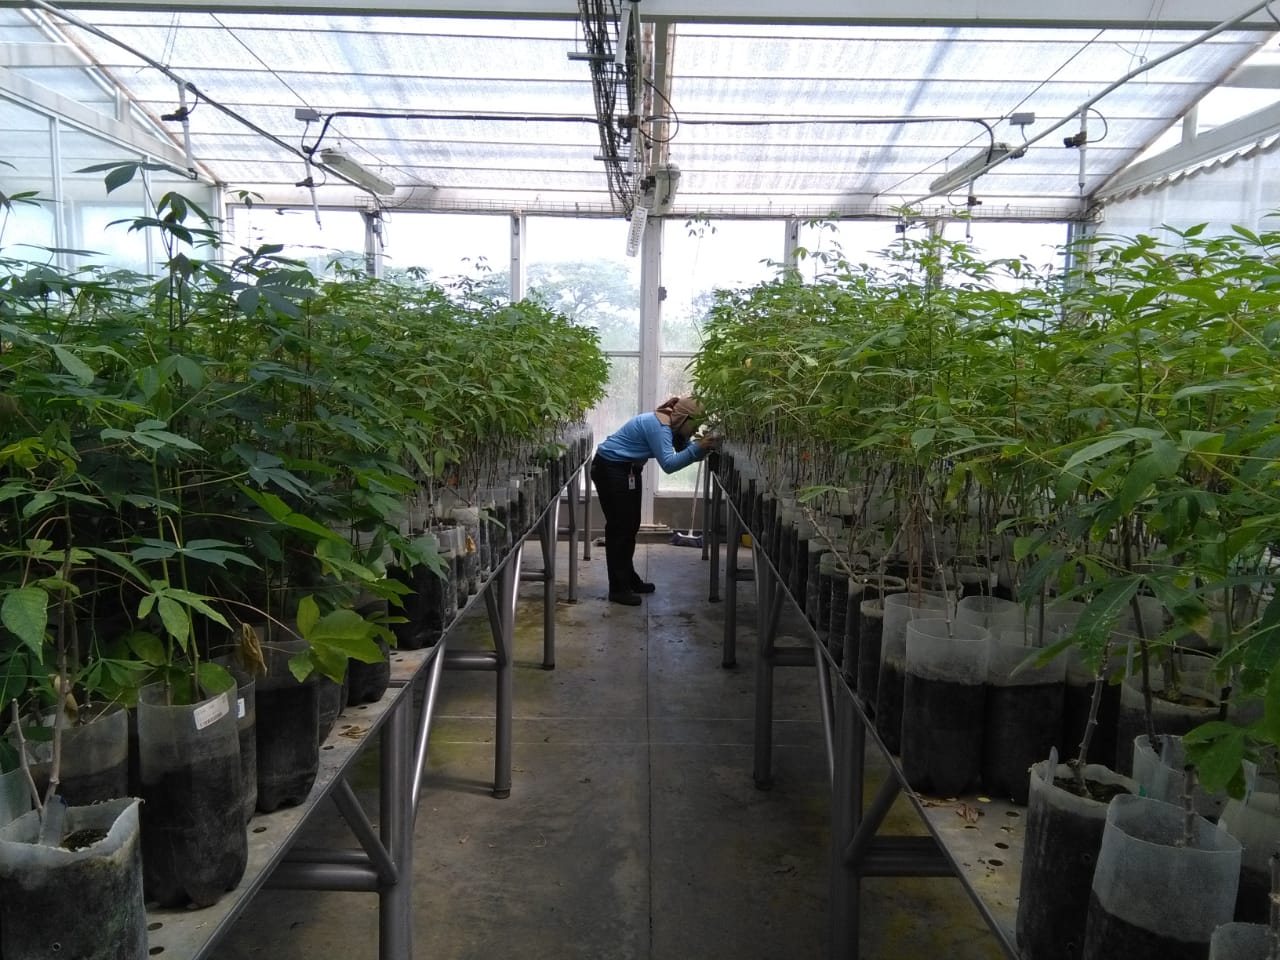 Research assistant Melissa Correa observing how cassava plants evolve in a greenhouse under restricted growth conditions.